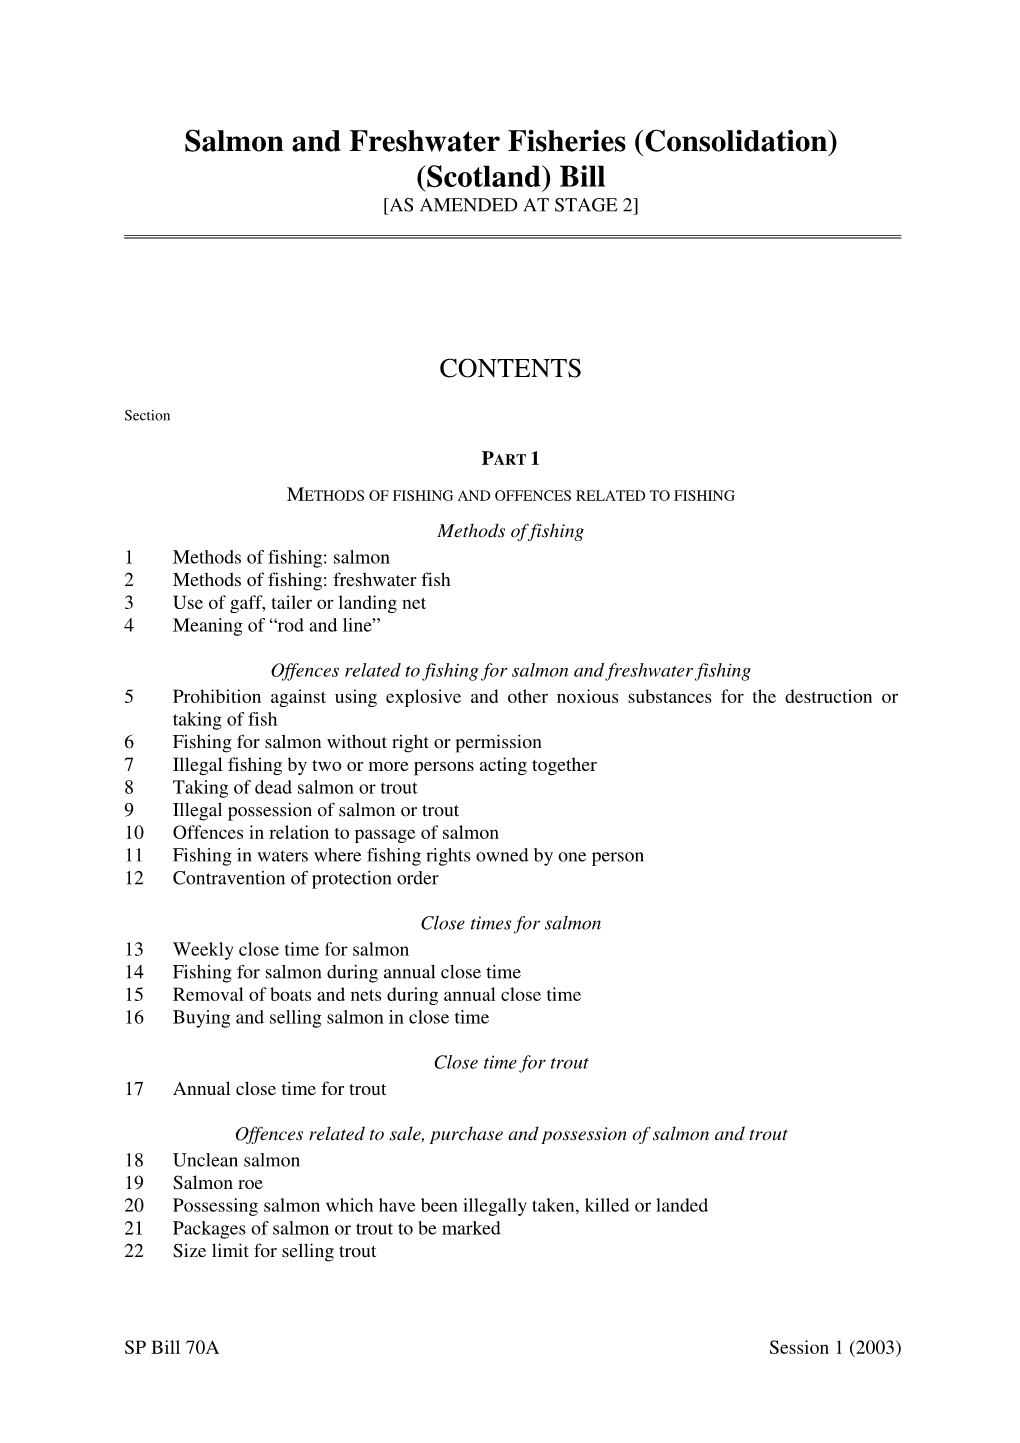 Salmon and Freshwater Fisheries (Consolidation) (Scotland) Bill [AS AMENDED at STAGE 2]